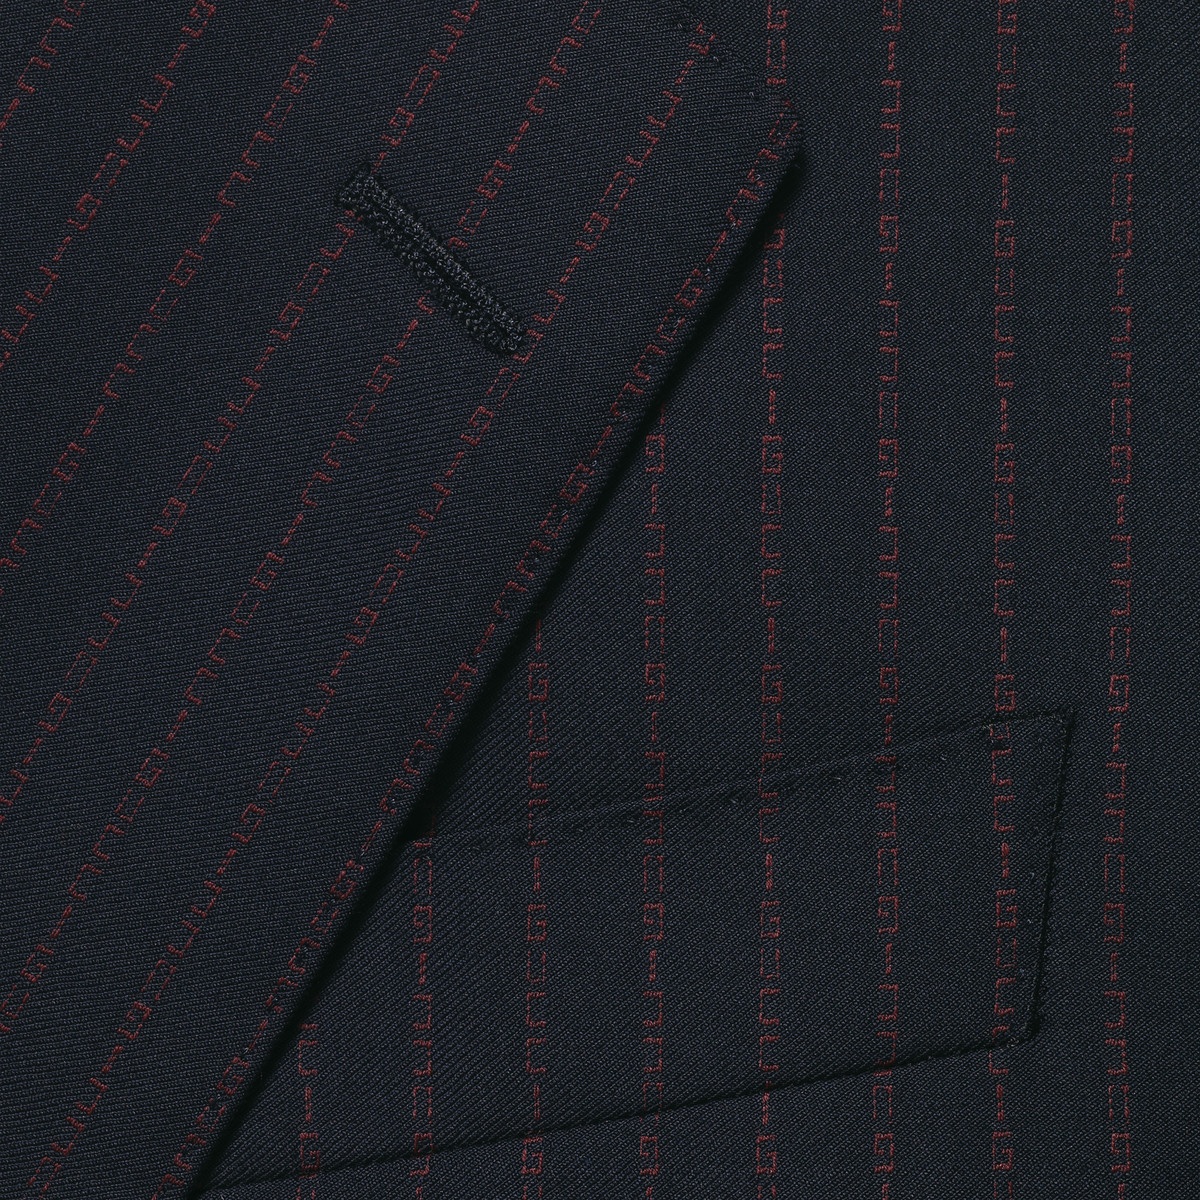 Fitted Gucci pinstripe suit - 8